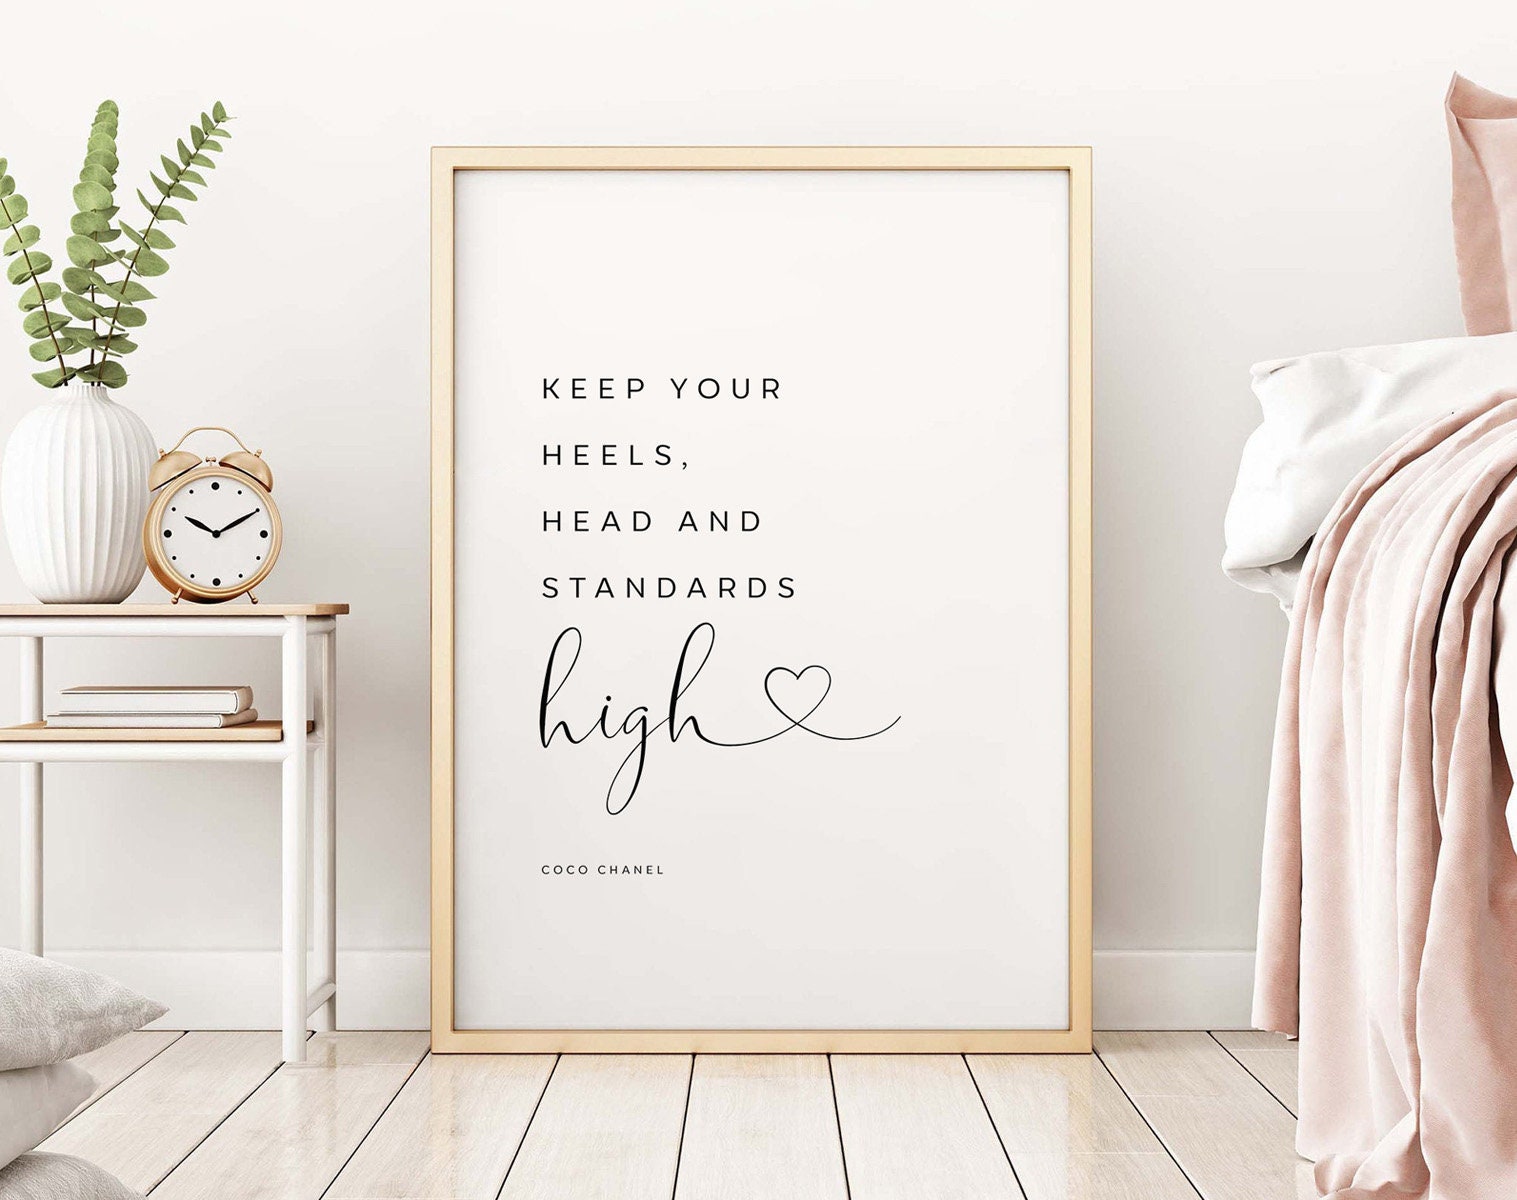 Keep your heels head & standards high - COCO Chanel A5 monochrome